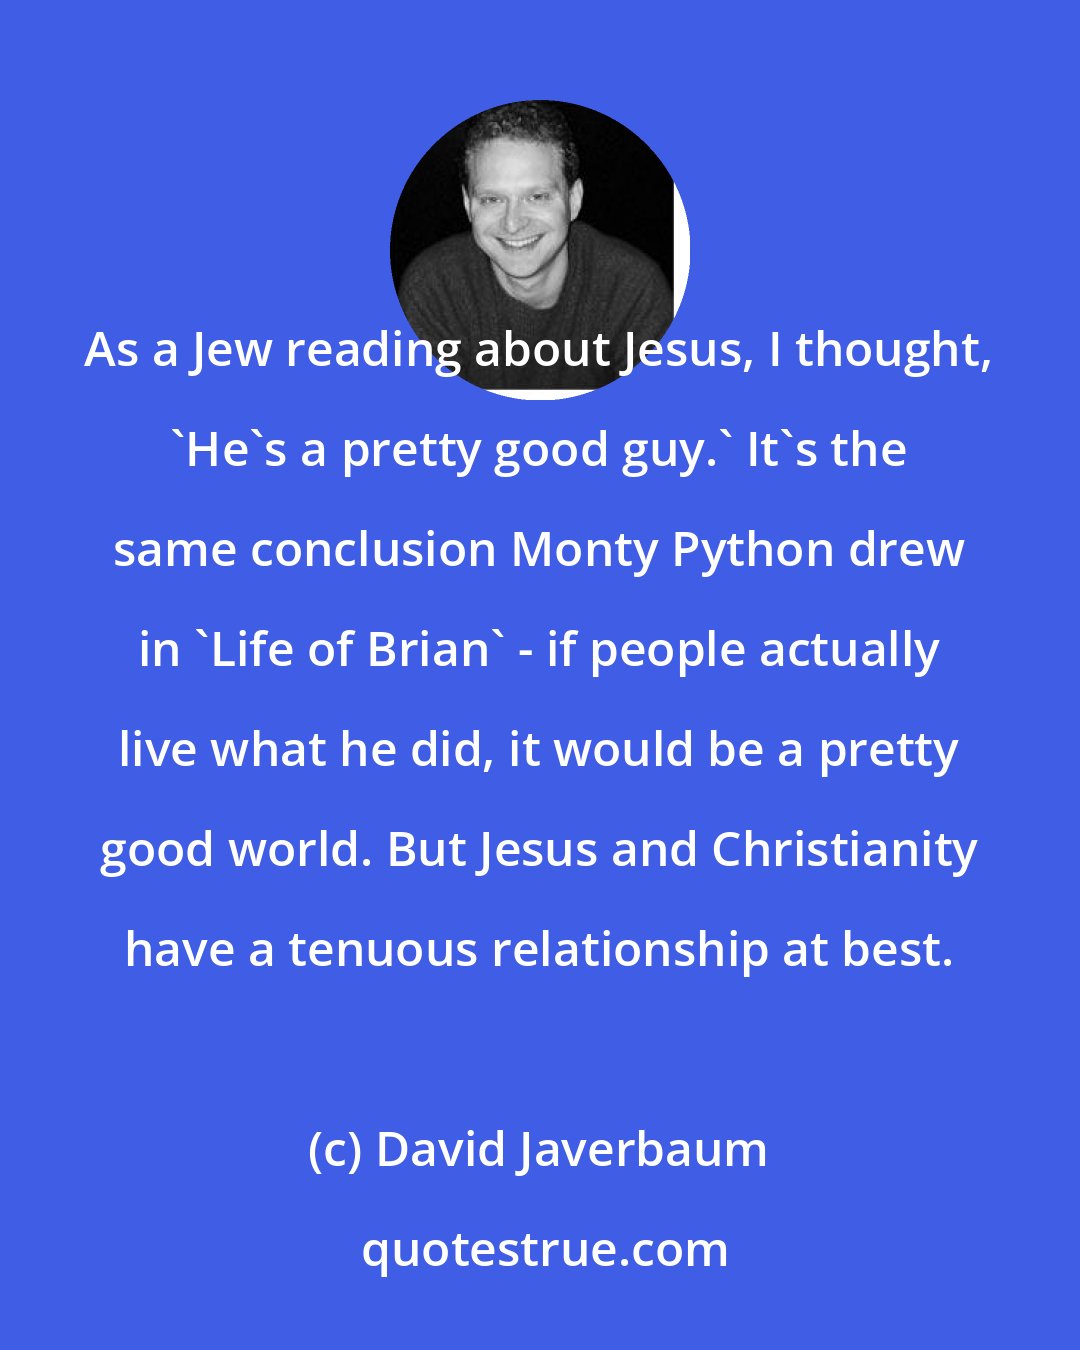 David Javerbaum: As a Jew reading about Jesus, I thought, 'He's a pretty good guy.' It's the same conclusion Monty Python drew in 'Life of Brian' - if people actually live what he did, it would be a pretty good world. But Jesus and Christianity have a tenuous relationship at best.